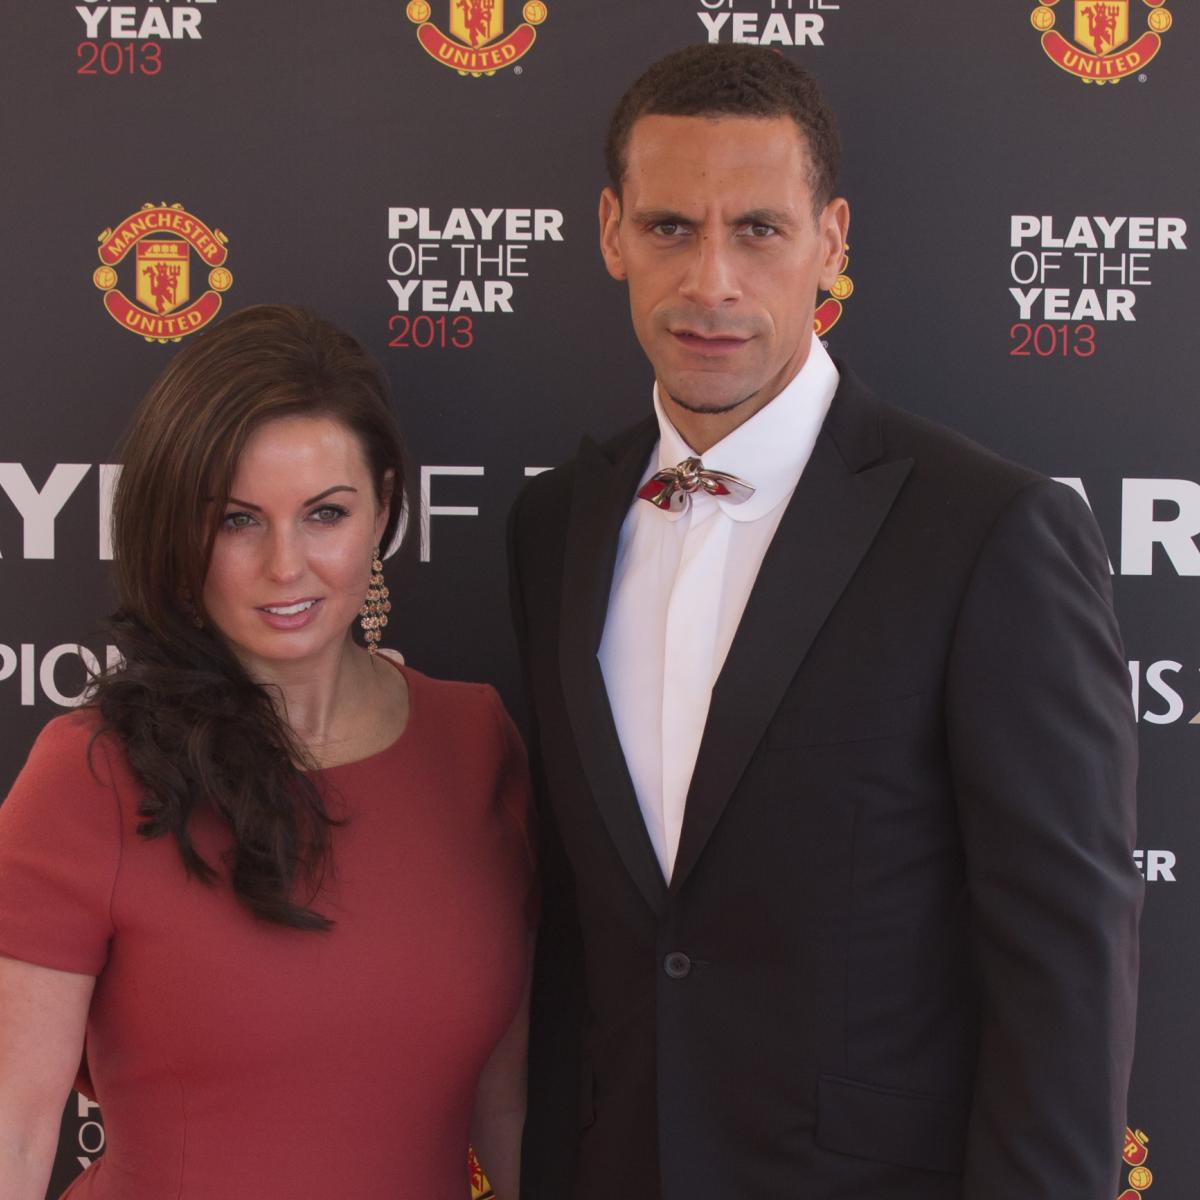 Rio Ferdinand S Wife Rebecca Dies At Age 34 After Battle With Breast Cancer Bleacher Report Latest News Videos And Highlights